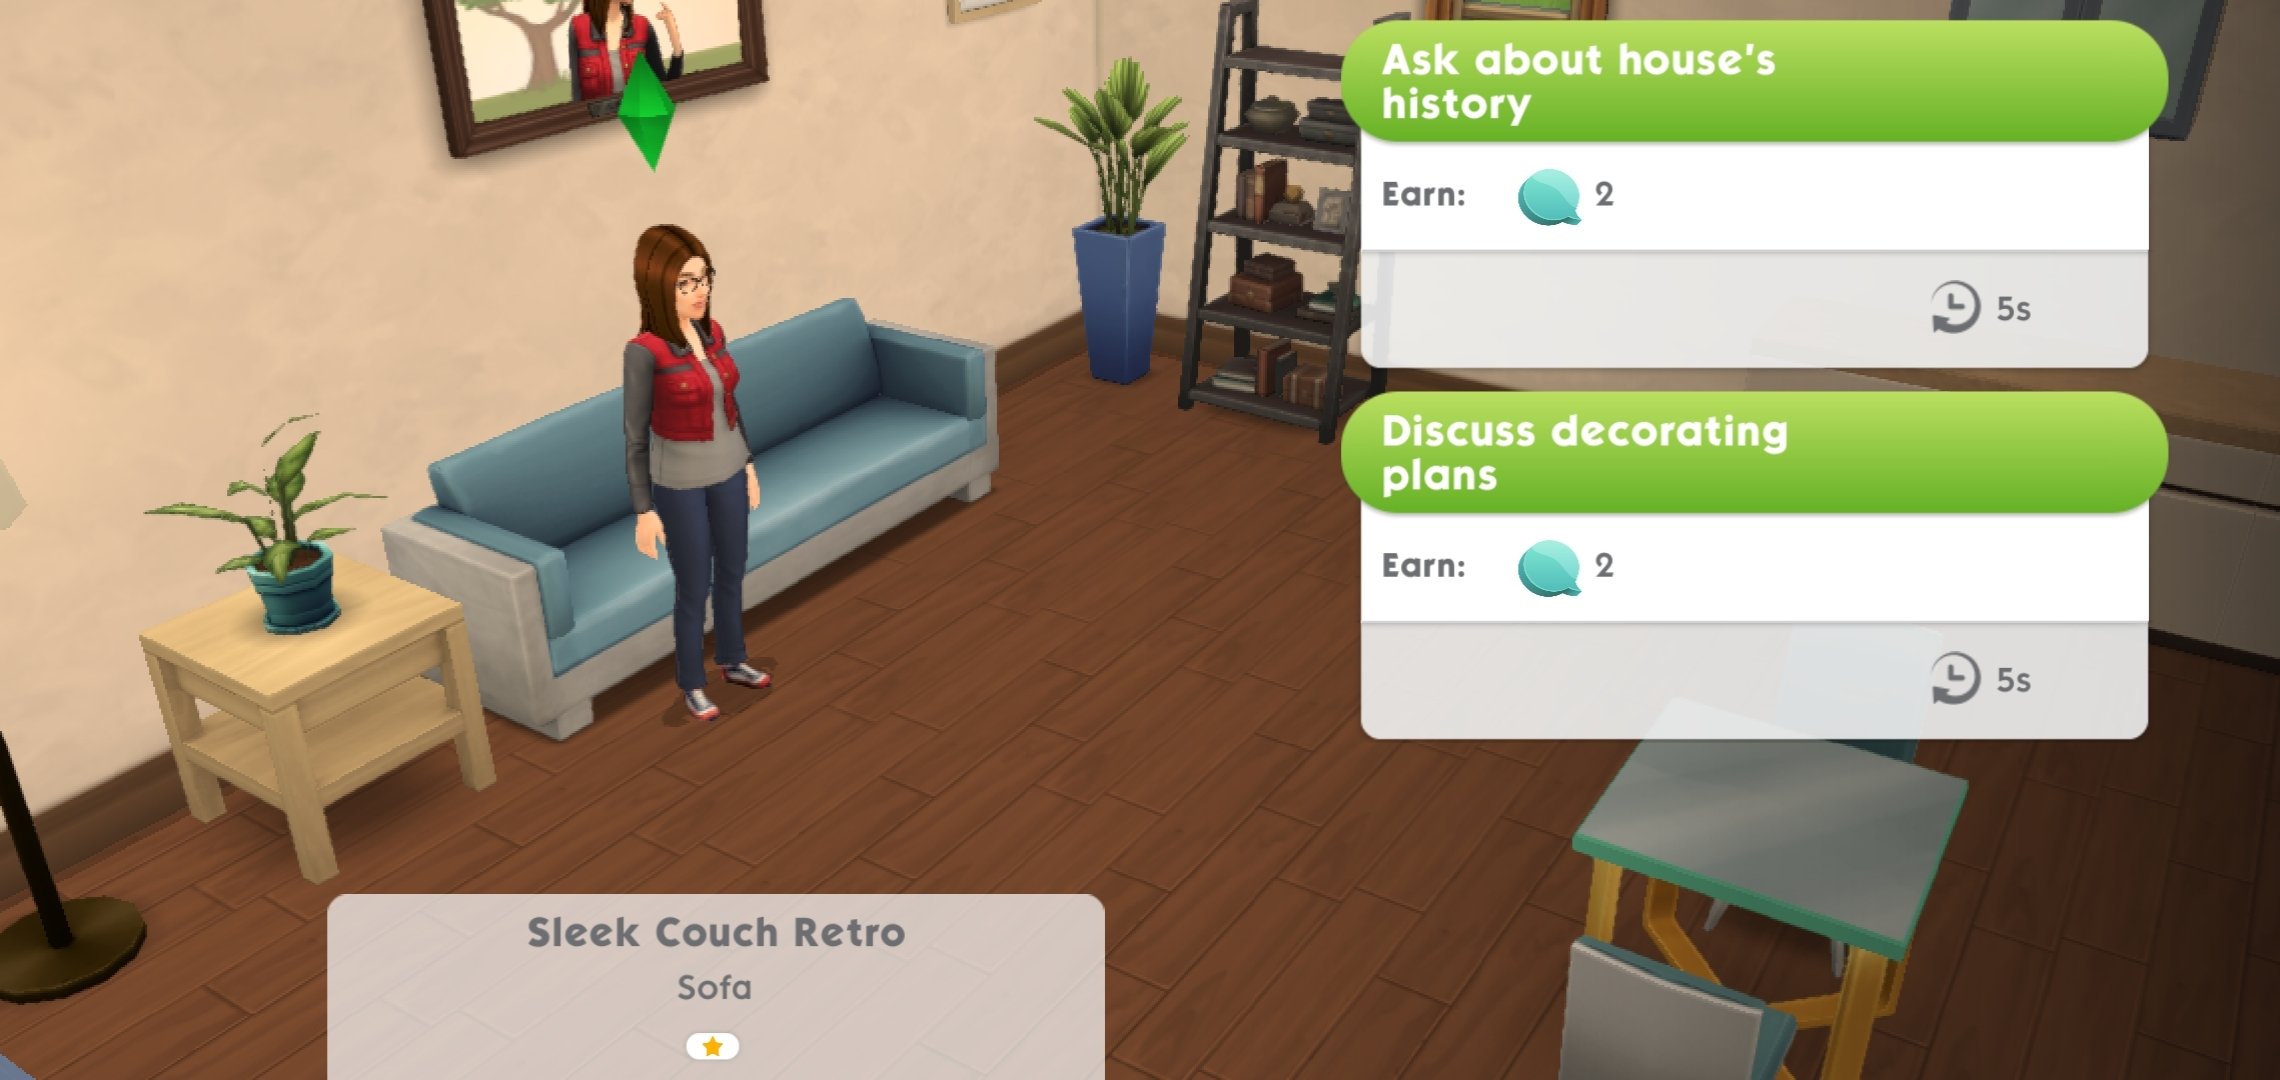 The Sims Mobile MOD APK Download for Android Free